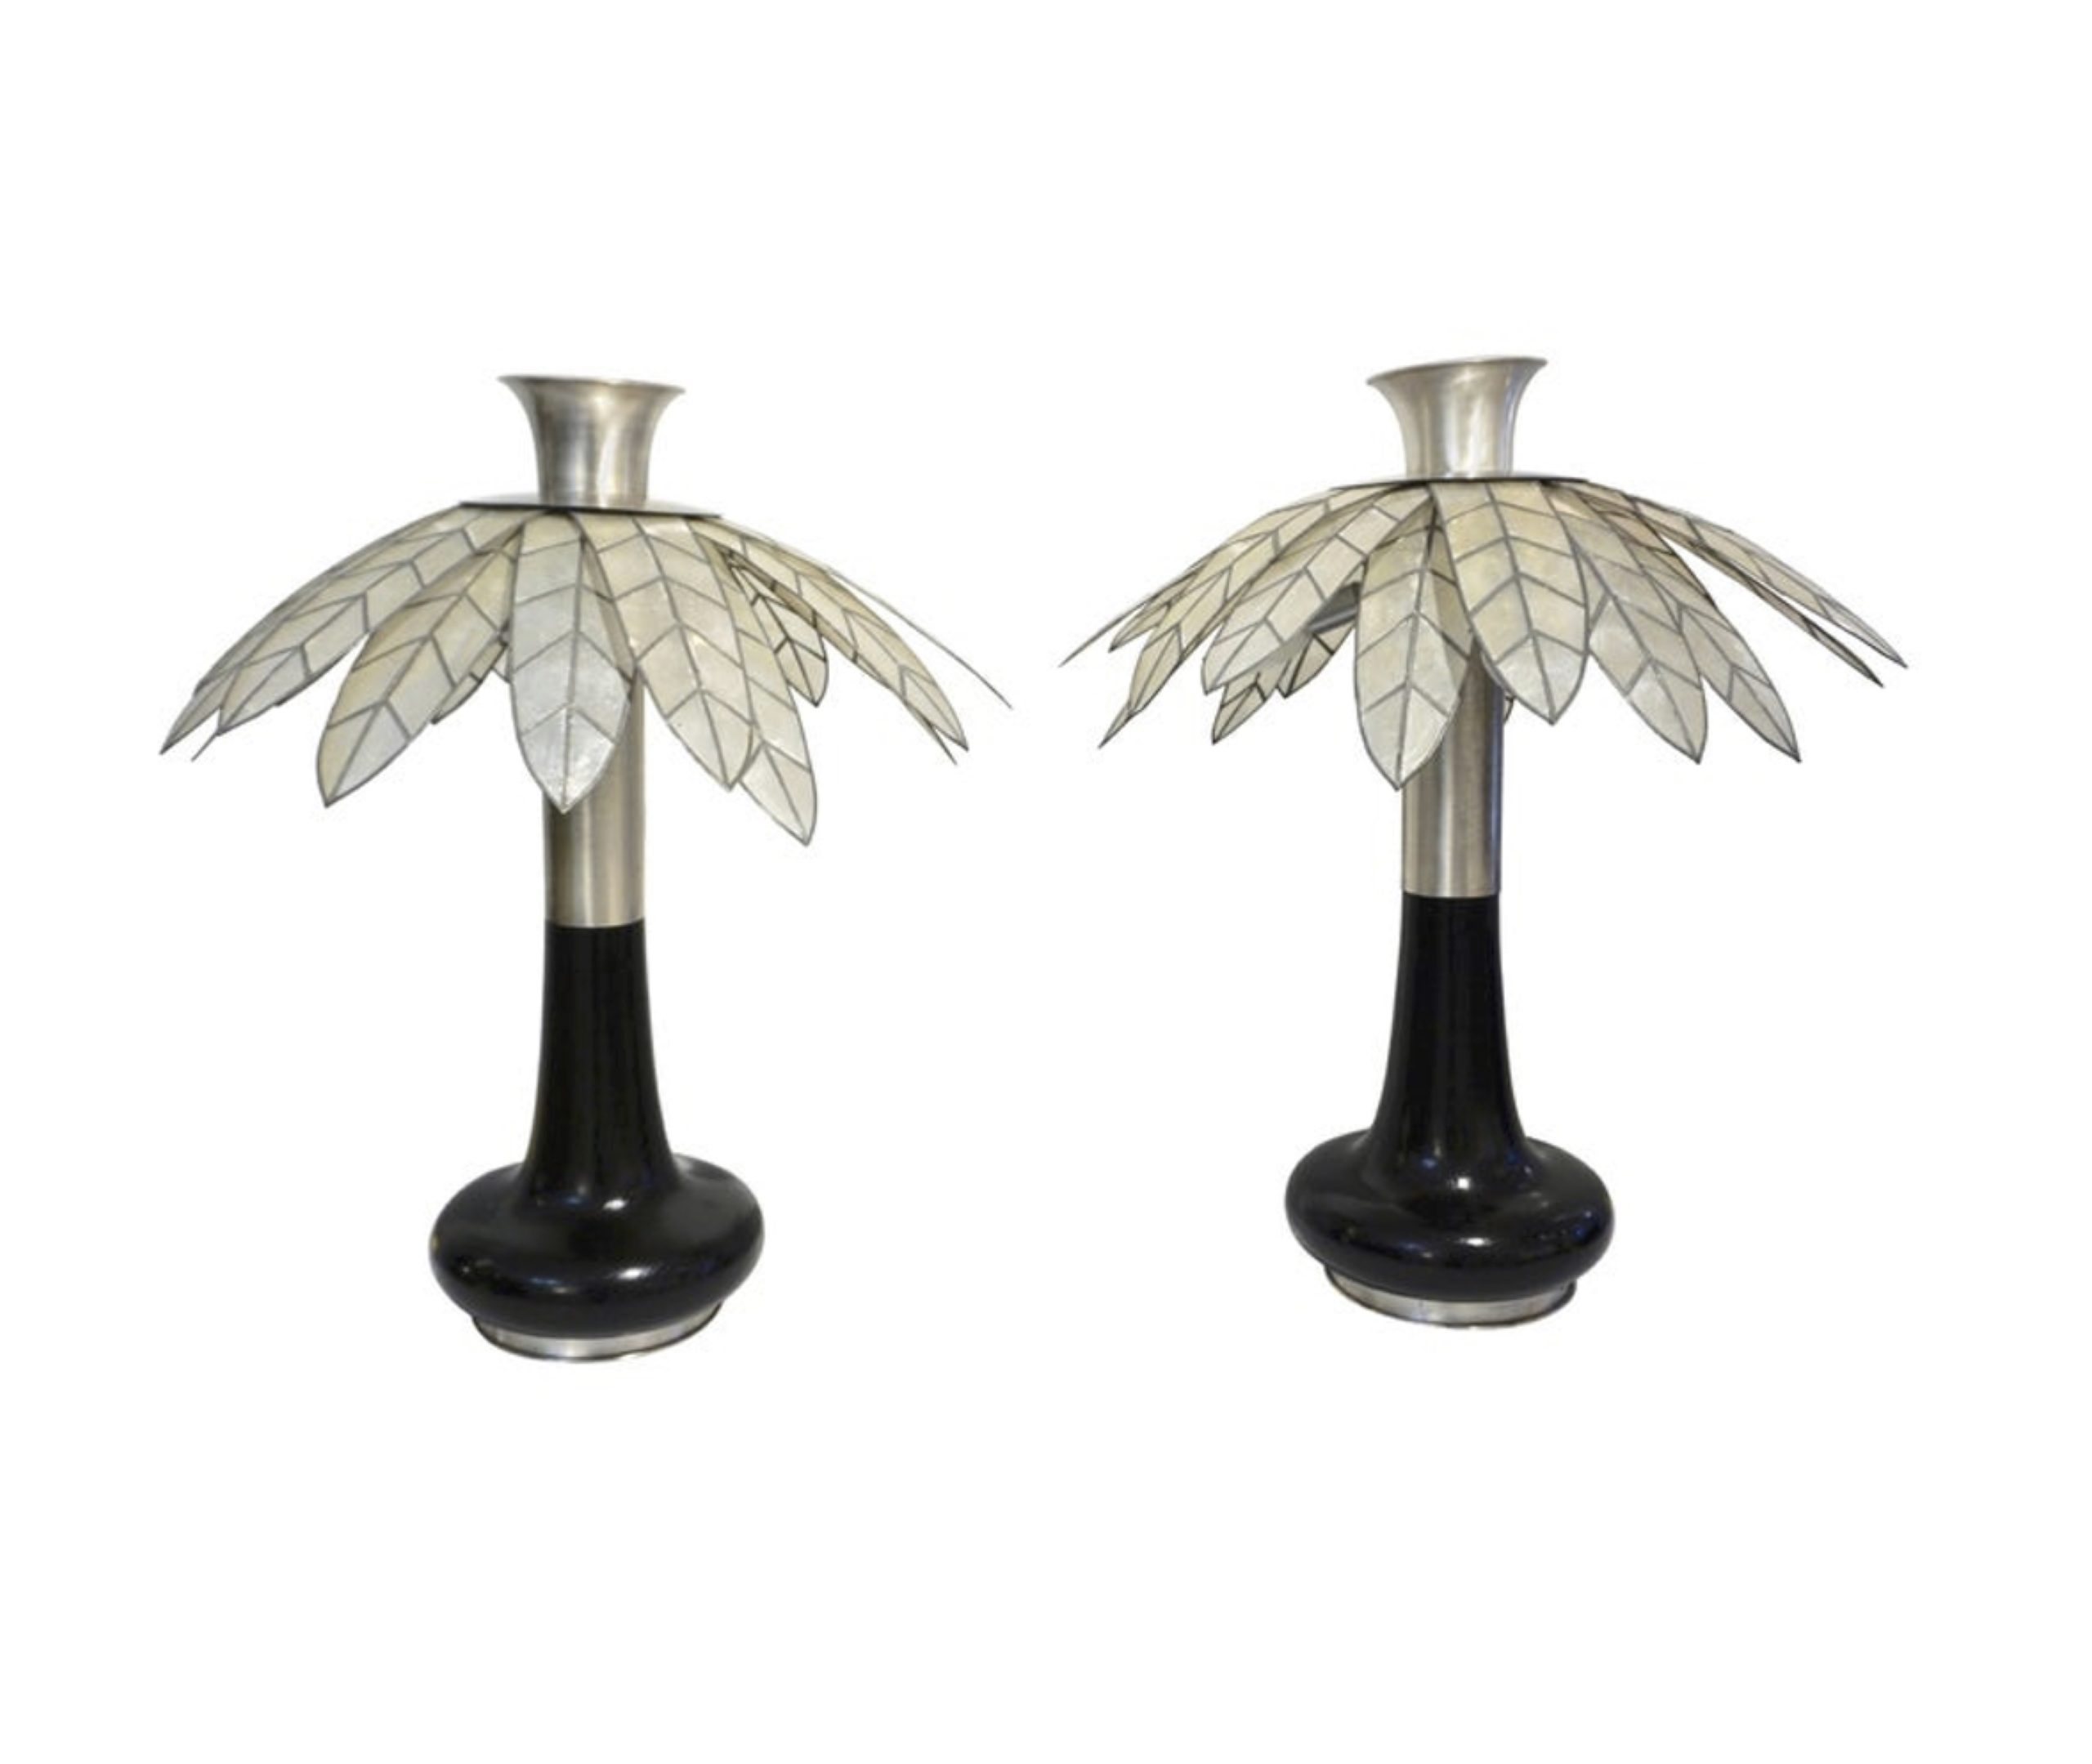 cosulich_interiors_and_antiques_products_new_york_design_1975_Banci_Italian_Art_Deco_Pair_of_Mother_of_Pearl_Black_Ebonized-scaled-1